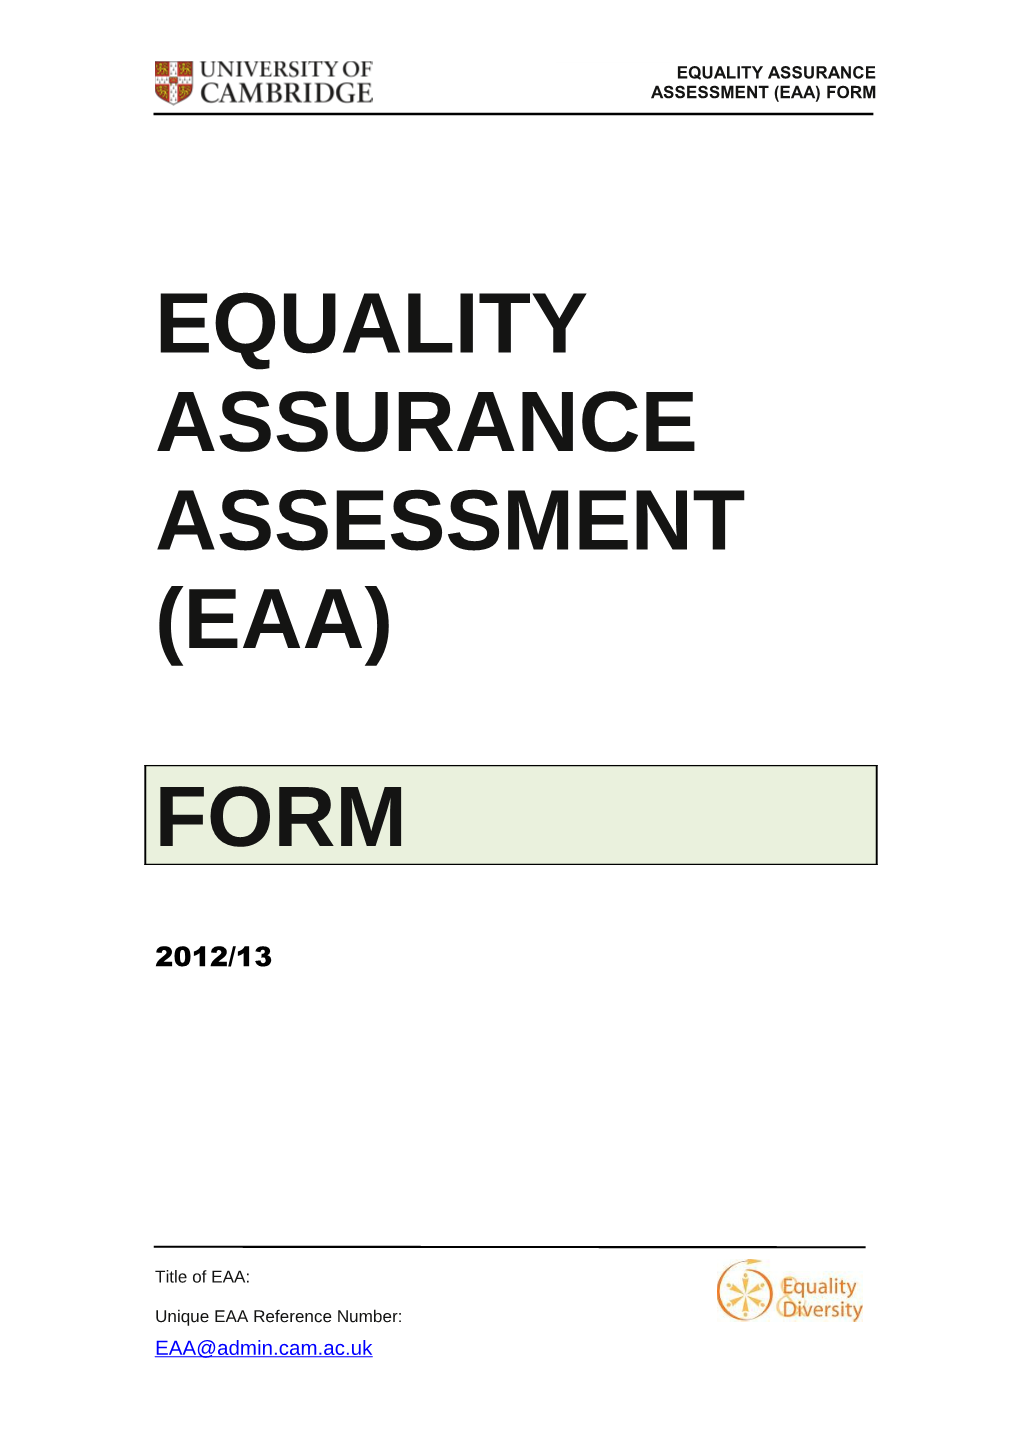 Equality Assurance Assessment (EAA)